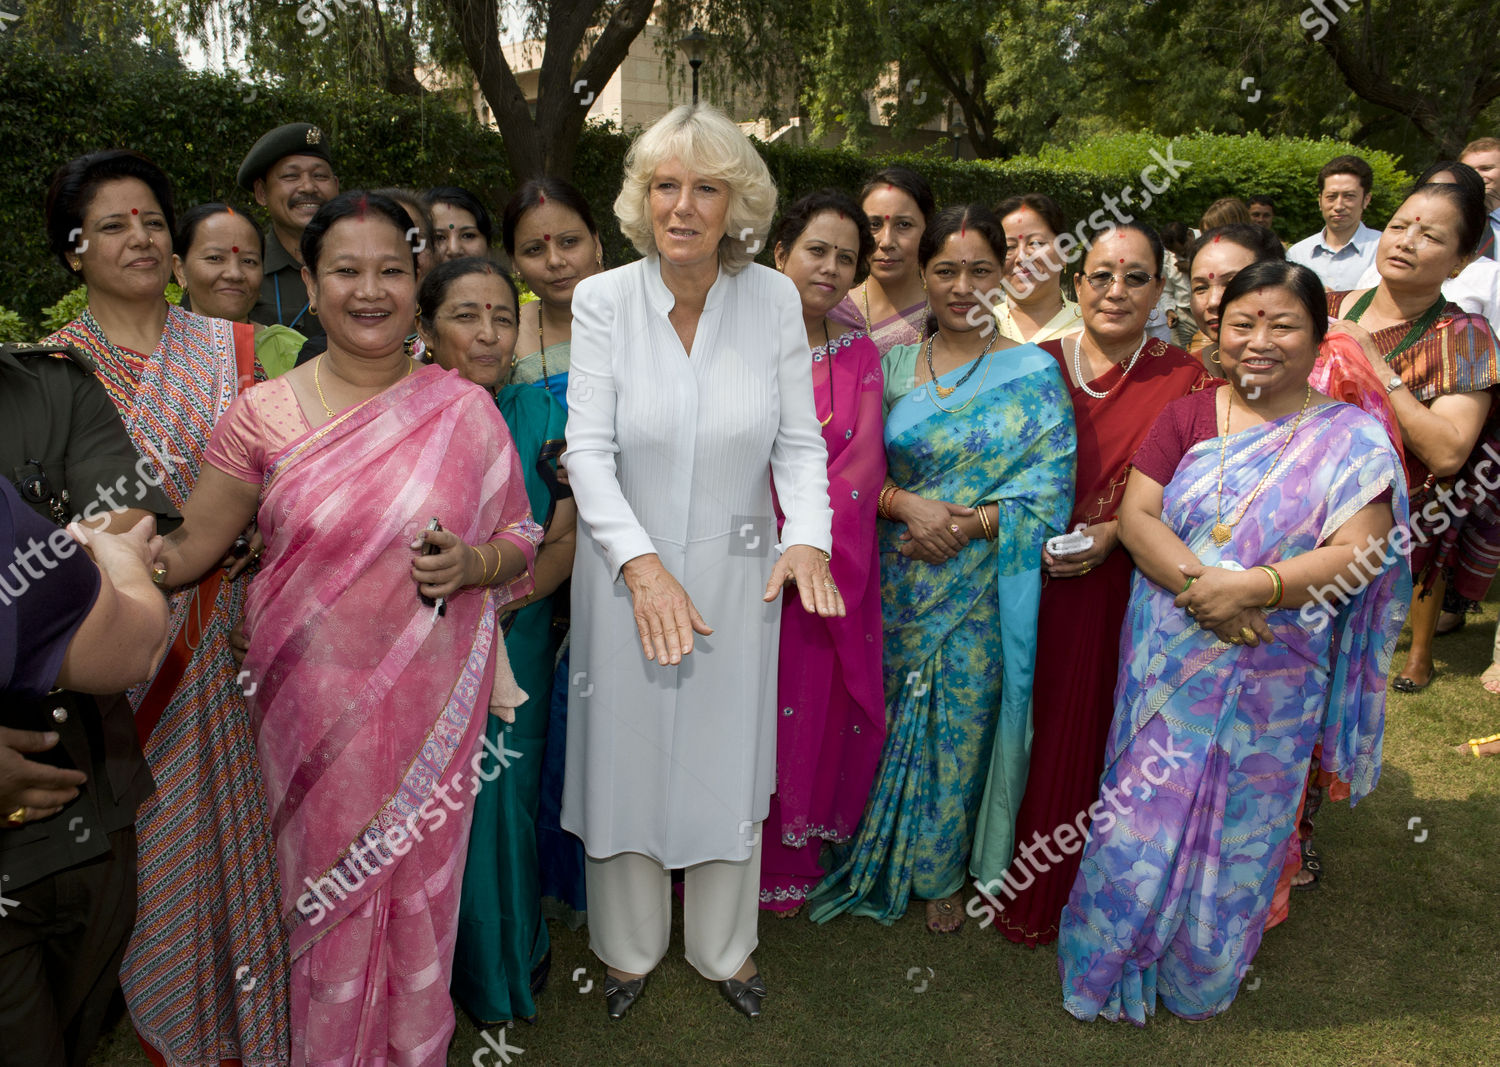 prince-charles-and-camilla-duchess-of-cornwall-visit-to-india-shutterstock-editorial-1229651n.jpg